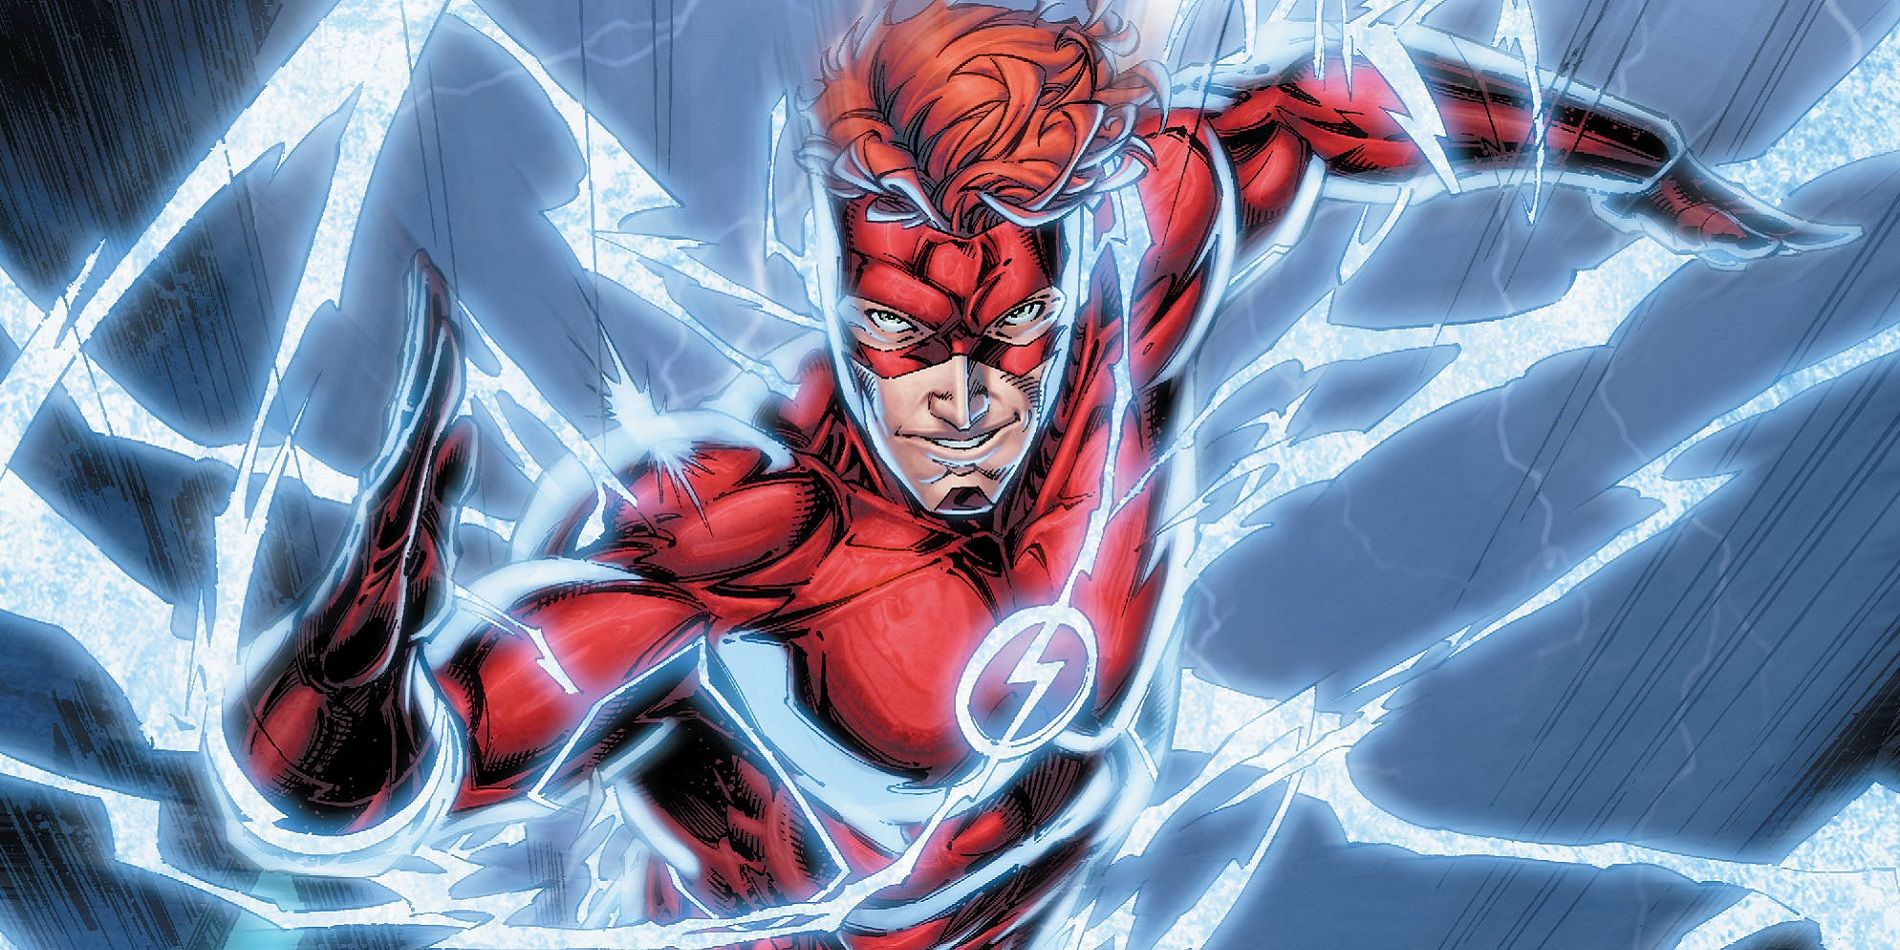 Wally West new suit in DC Rebirth